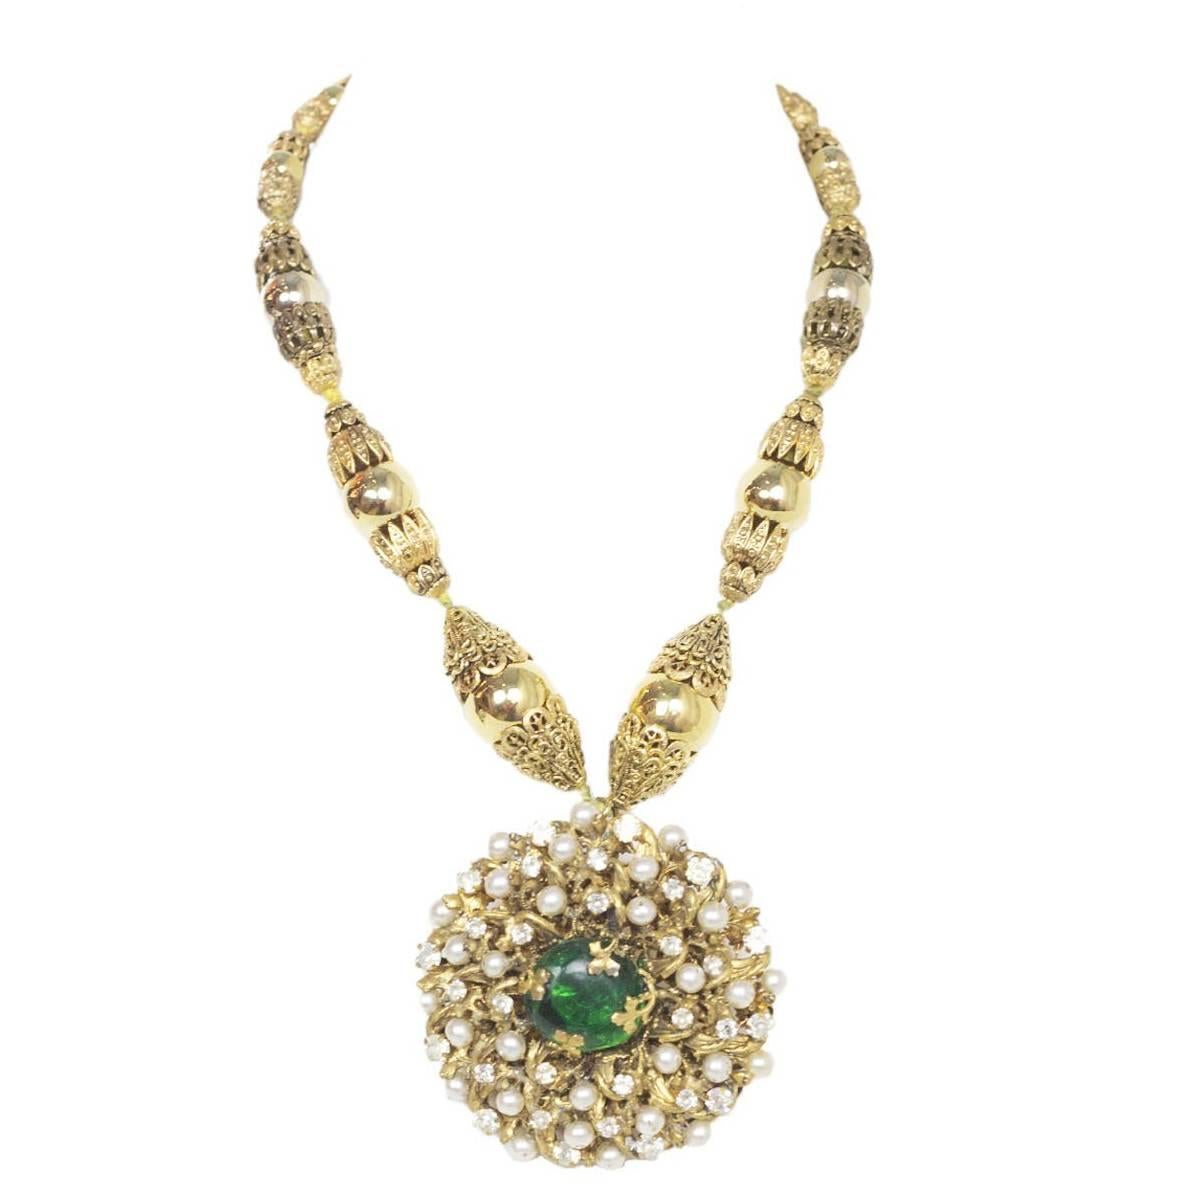 Chanel 3 Star Couture Faux Pearl And Stone Necklace. Features couture filigree beaded strand with over-sized pearl and crystal encrusted pendant with green gripoix center.

Year of Production: Circa 1950's
Color: Gold, green, ivory
Materials: Metal,